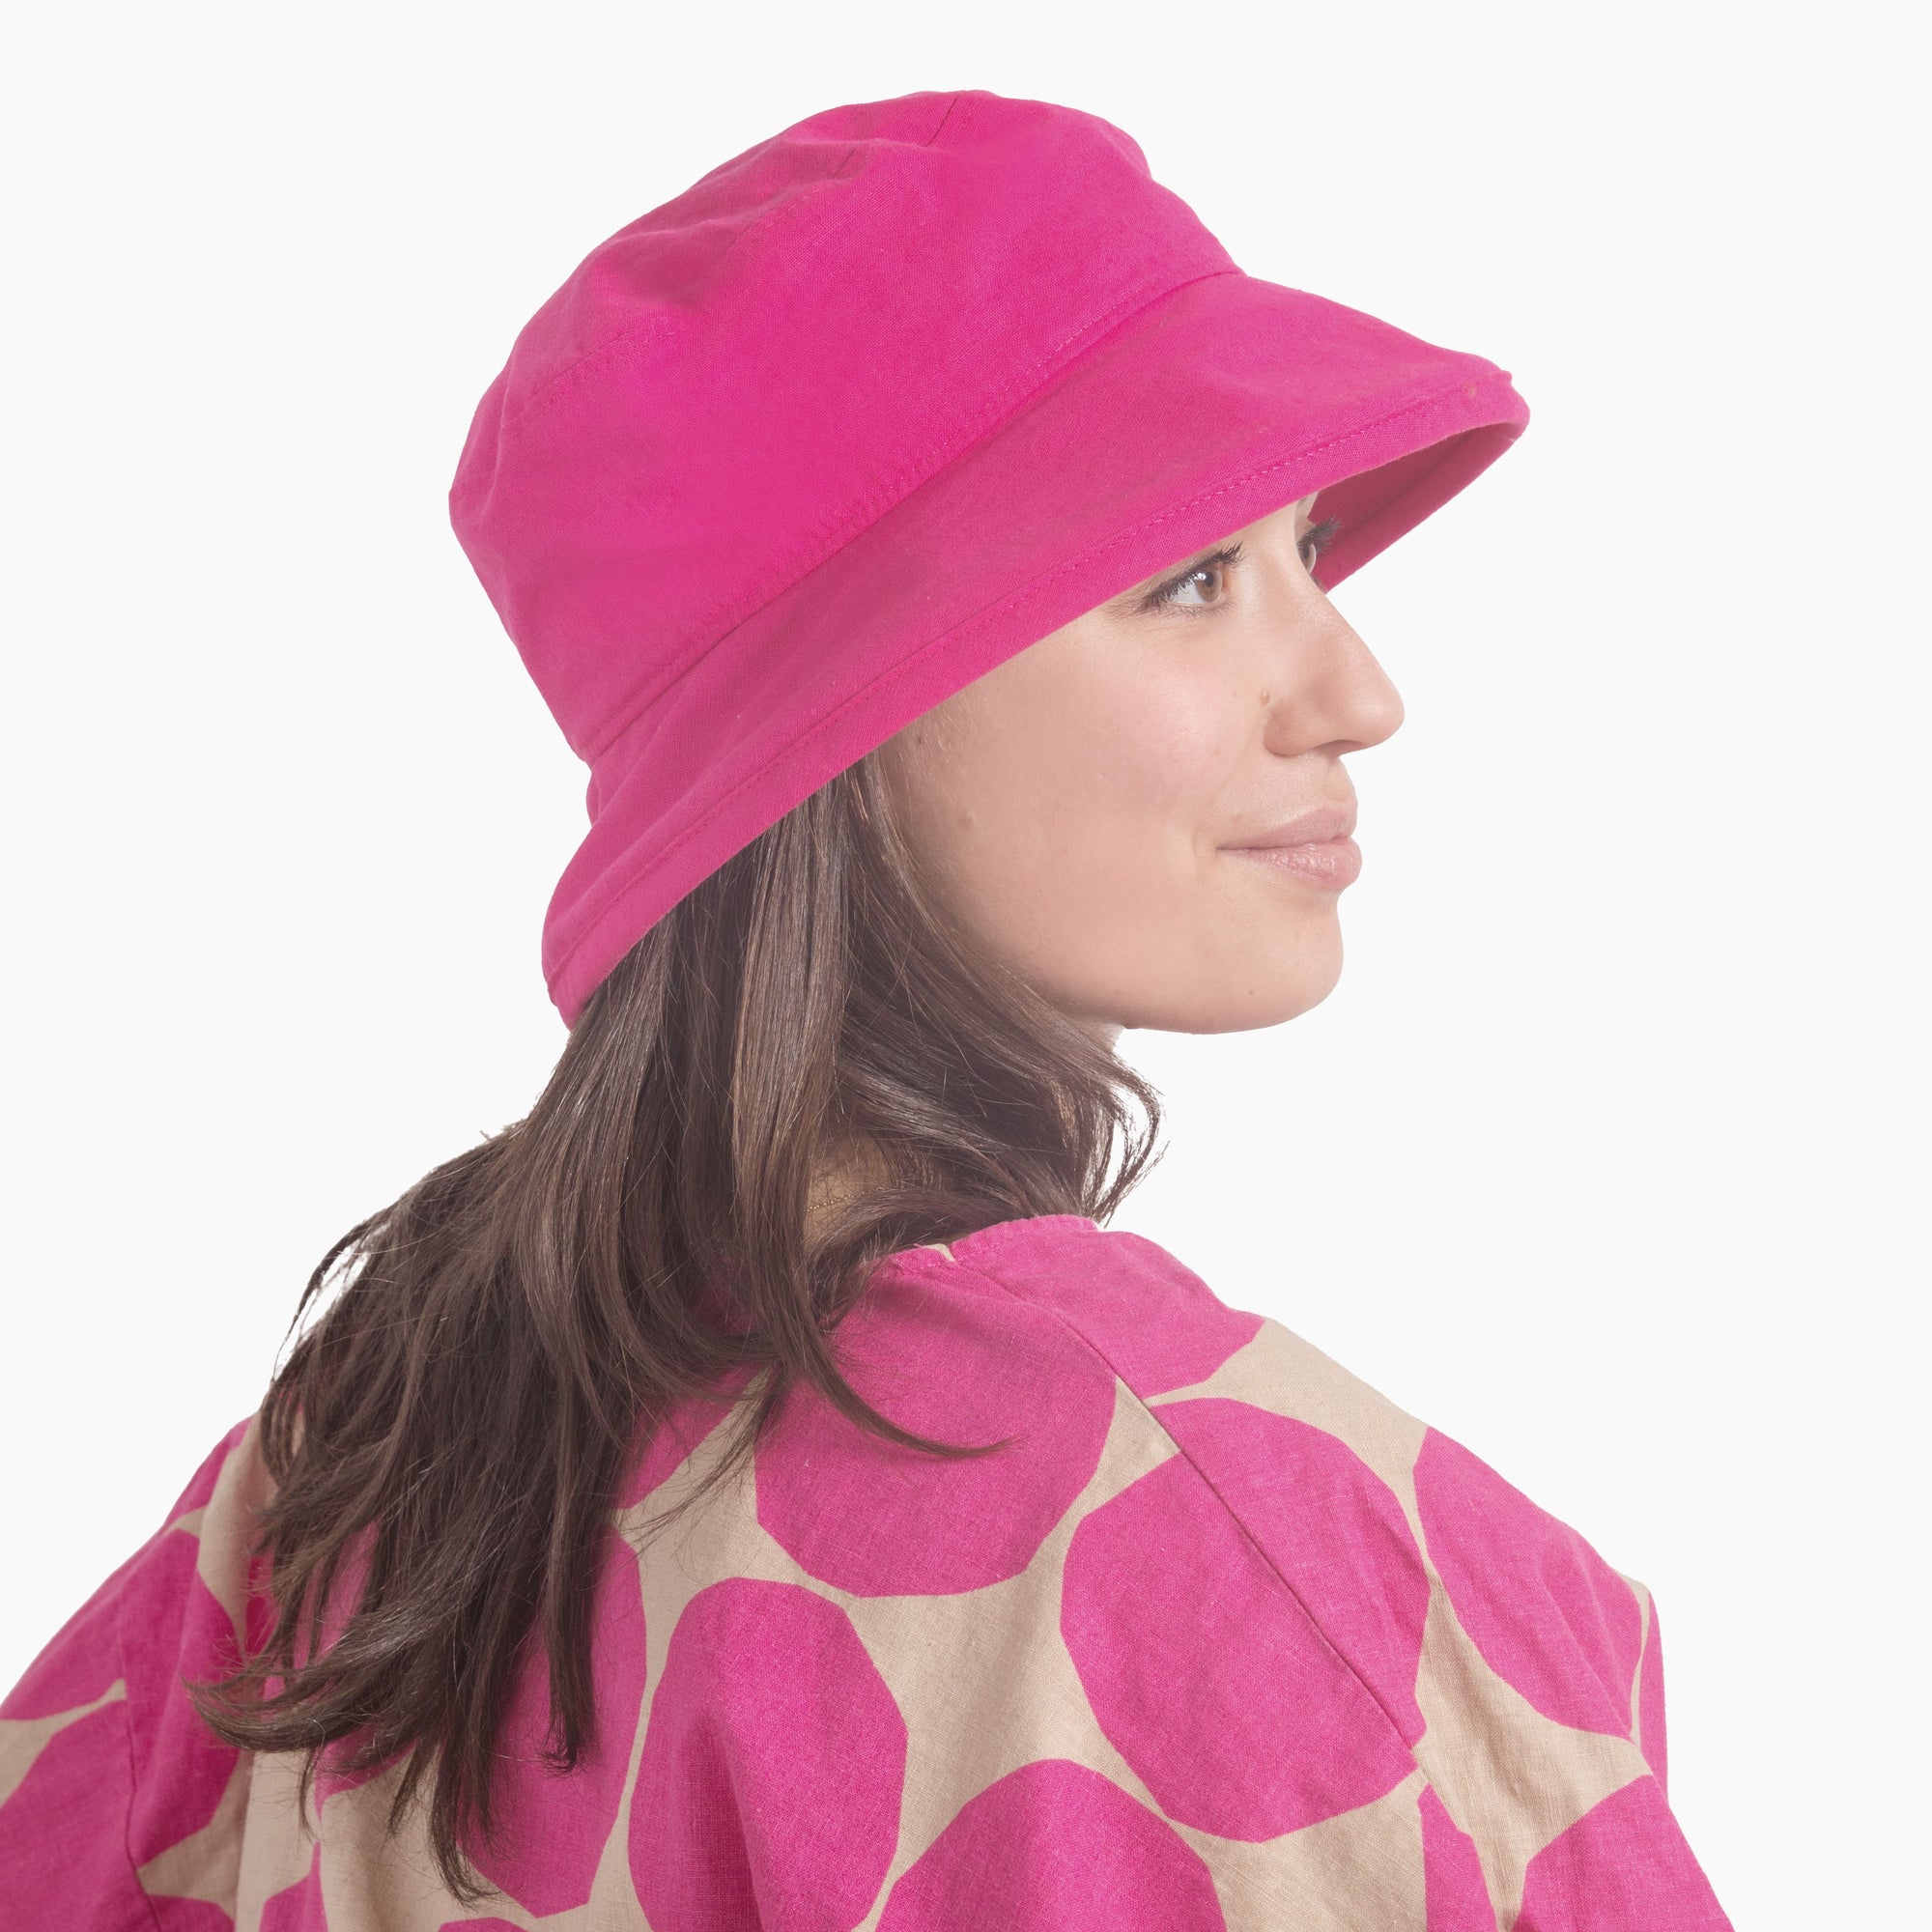 linen slouch hat-easy summer wearing, sport hat, golf hat-live summer in colour-bright pink hat-upf50 excellent sun protection hat-made in canada hat-linen hat-puffin gear hat